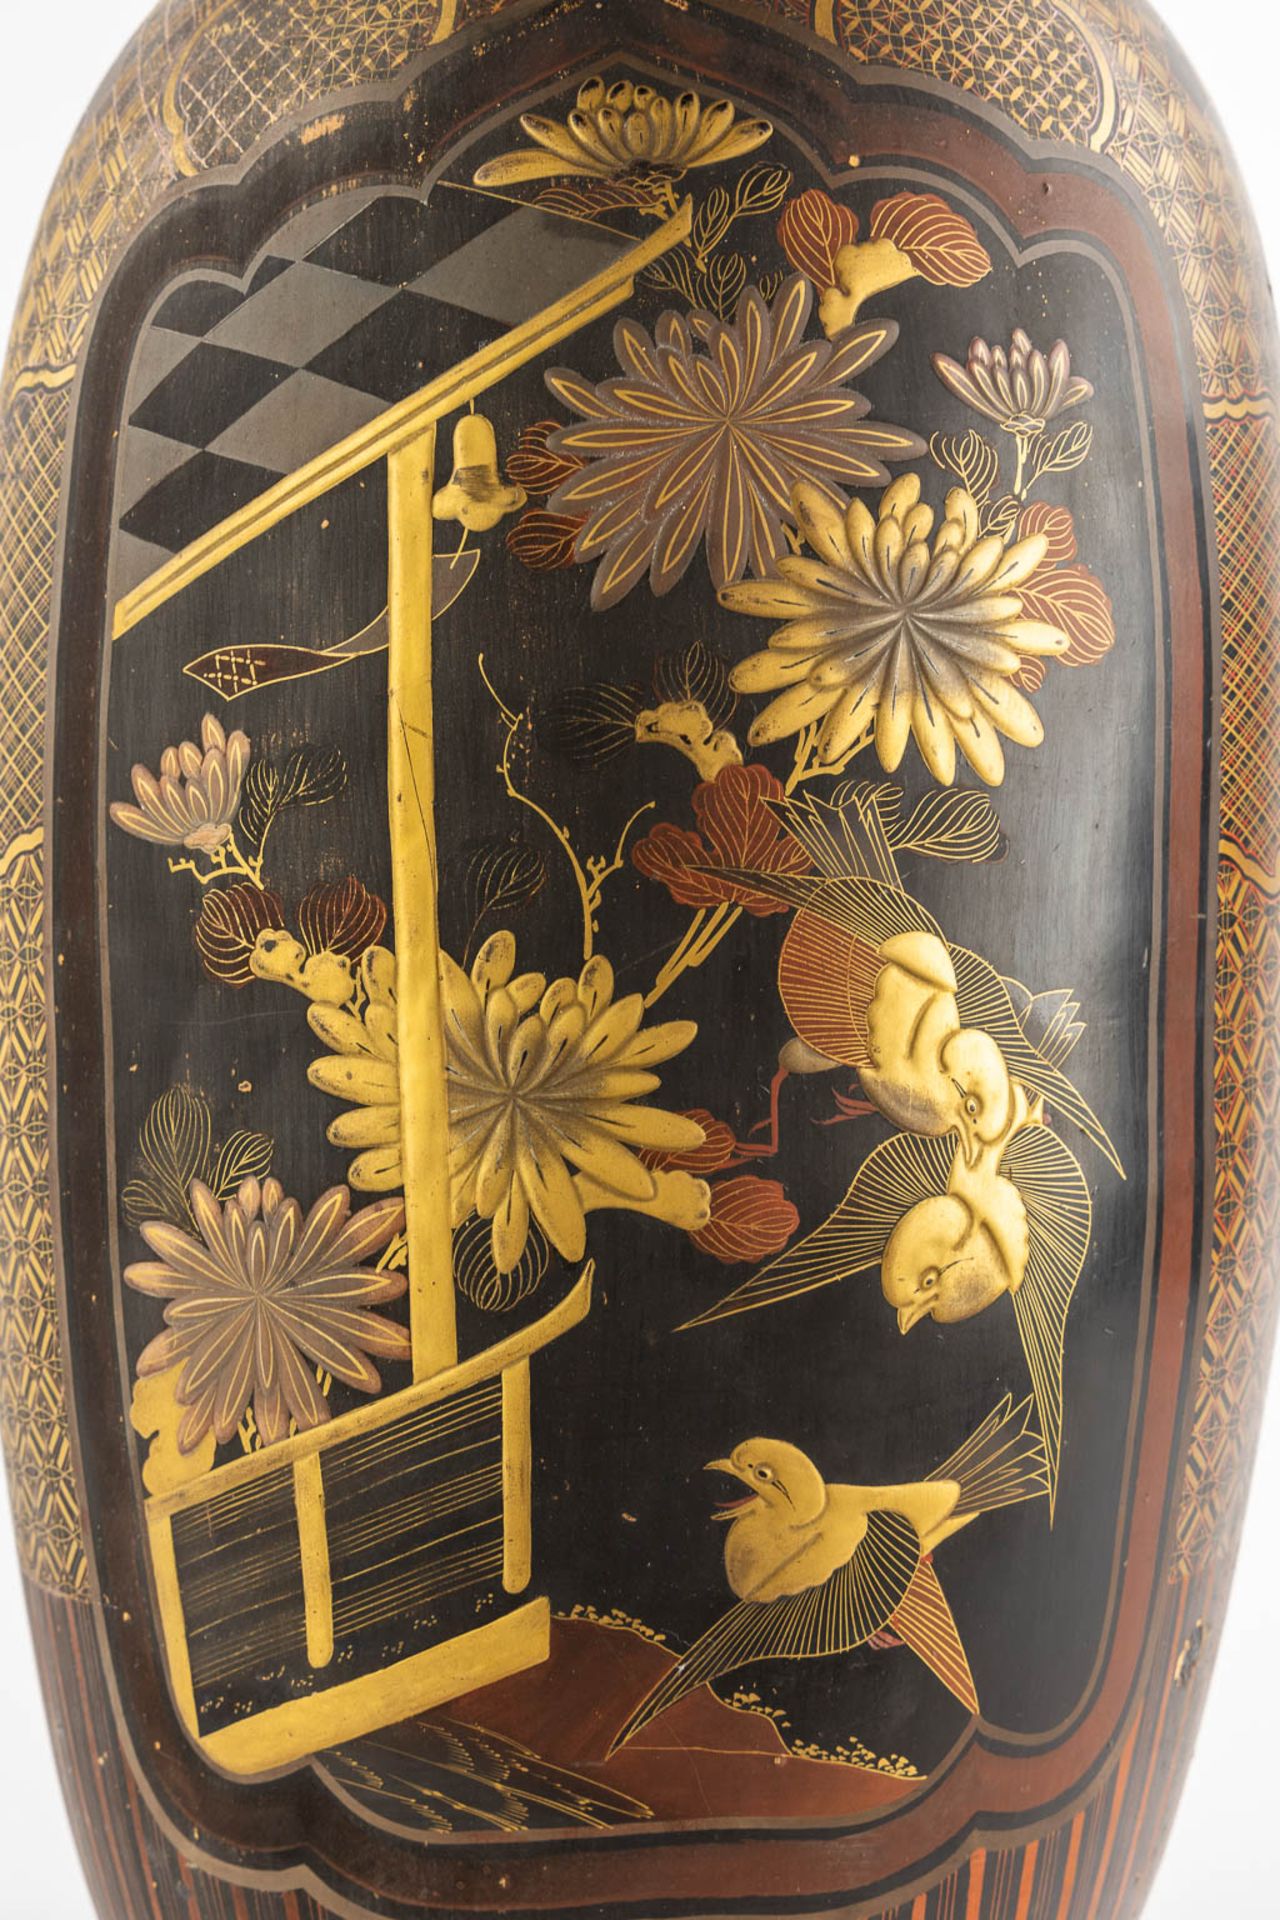 A Japanese porcelain vase, finished with red and gold lacquer. Meij period. (H:61 x D:27 cm) - Bild 13 aus 14